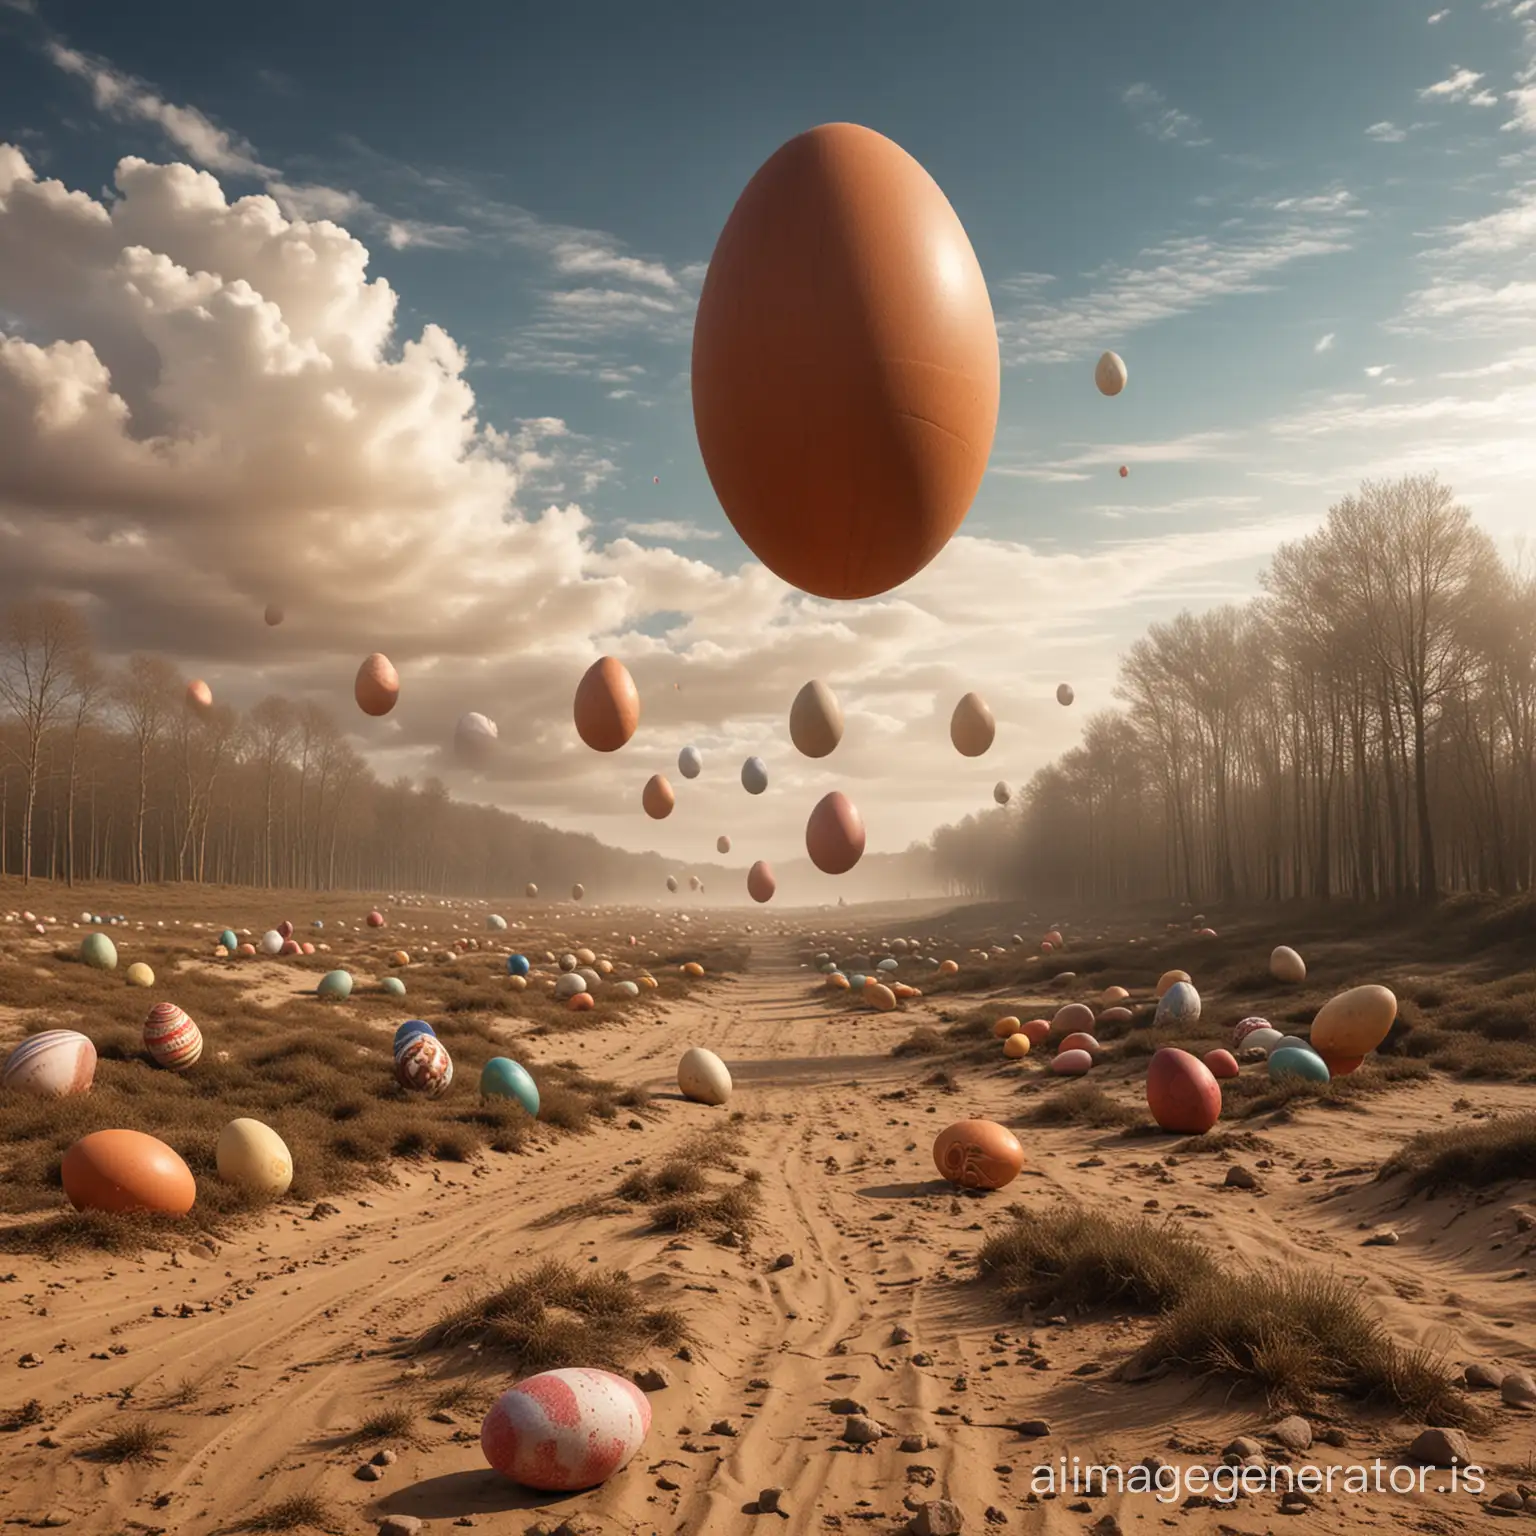 Vibrant-DuneInspired-Sky-Soaring-Giant-MultiMaterial-Easter-Eggs-Over-a-Picturesque-Countryside-and-Lush-Forest